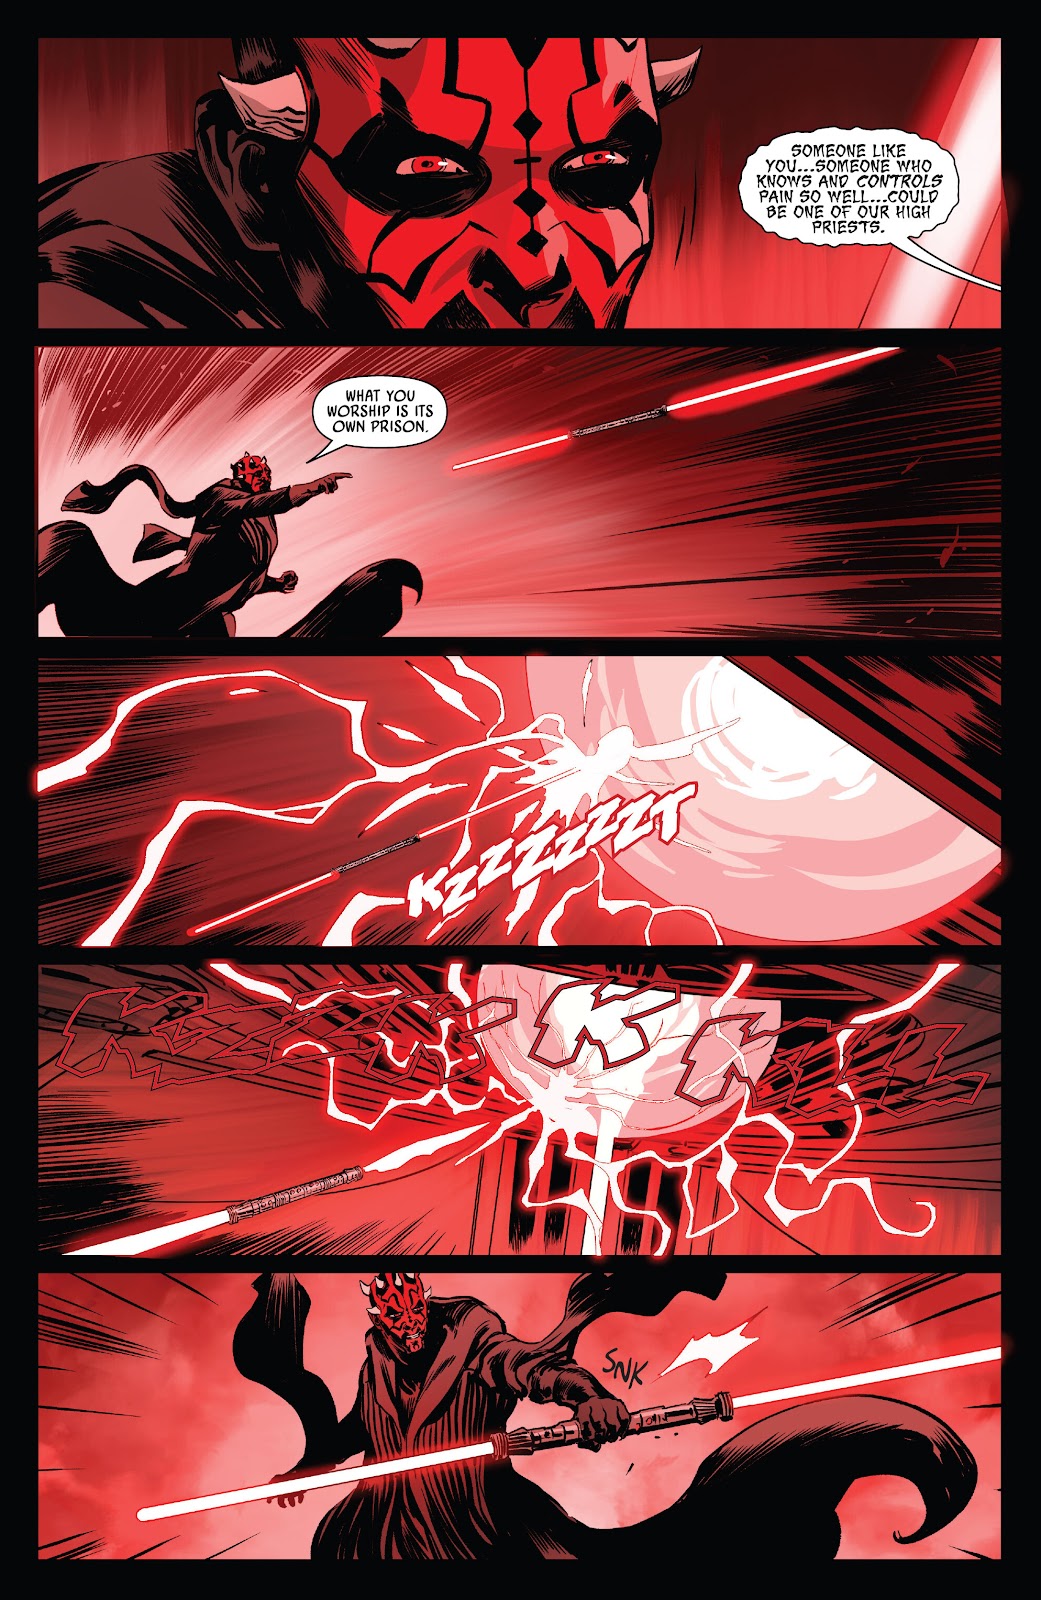 Star Wars: Darth Maul - Black, White & Red issue 1 - Page 27